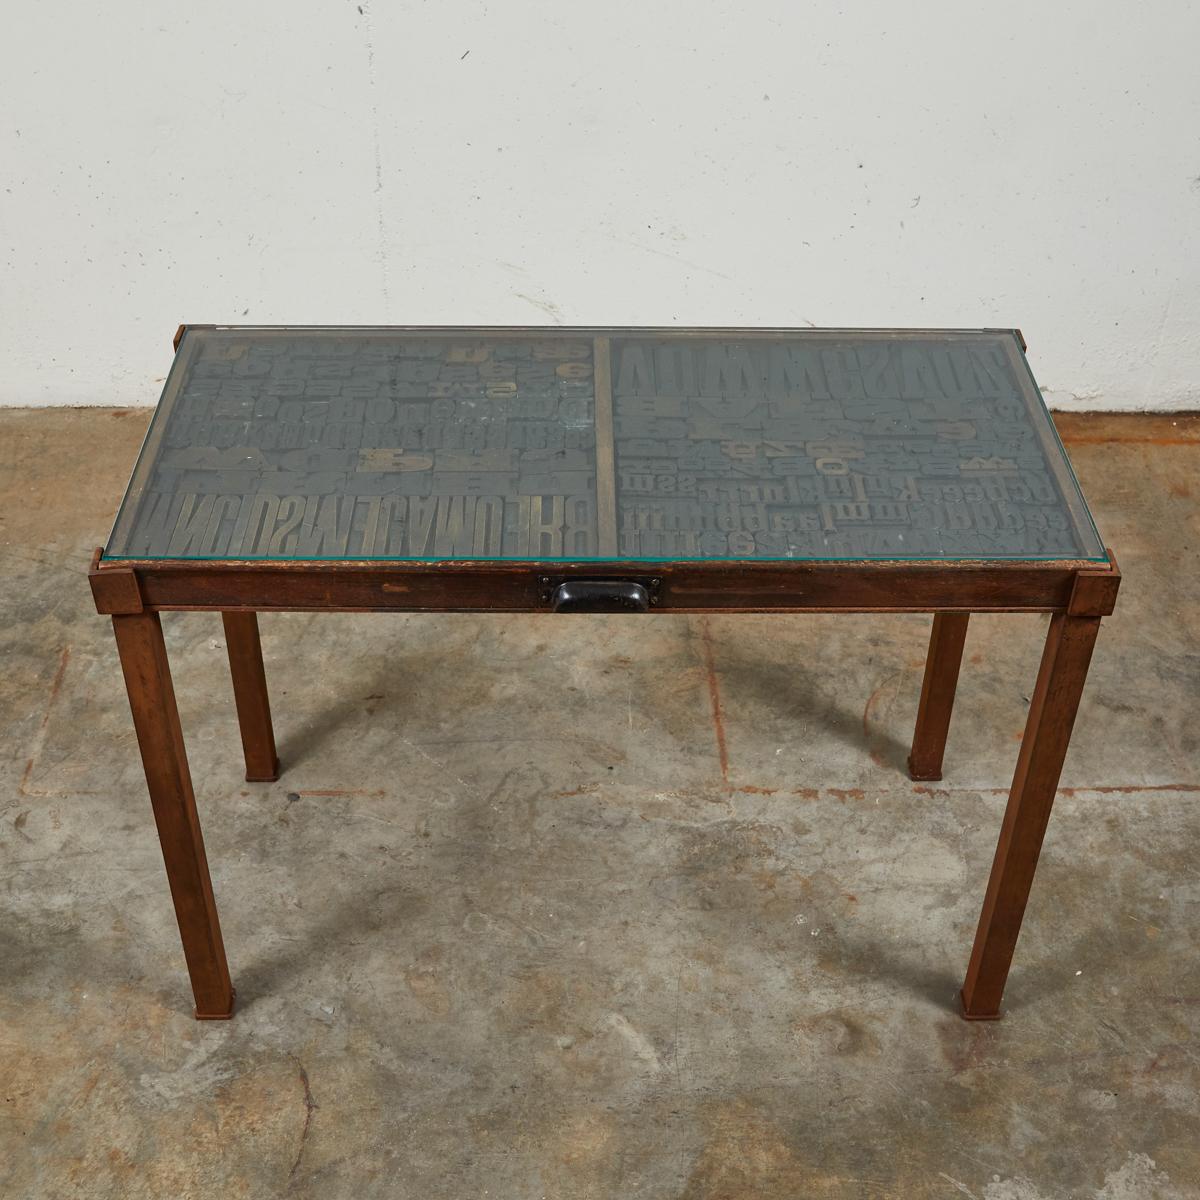 Late 19th Century Industrial Typeset Metal Table For Sale 2